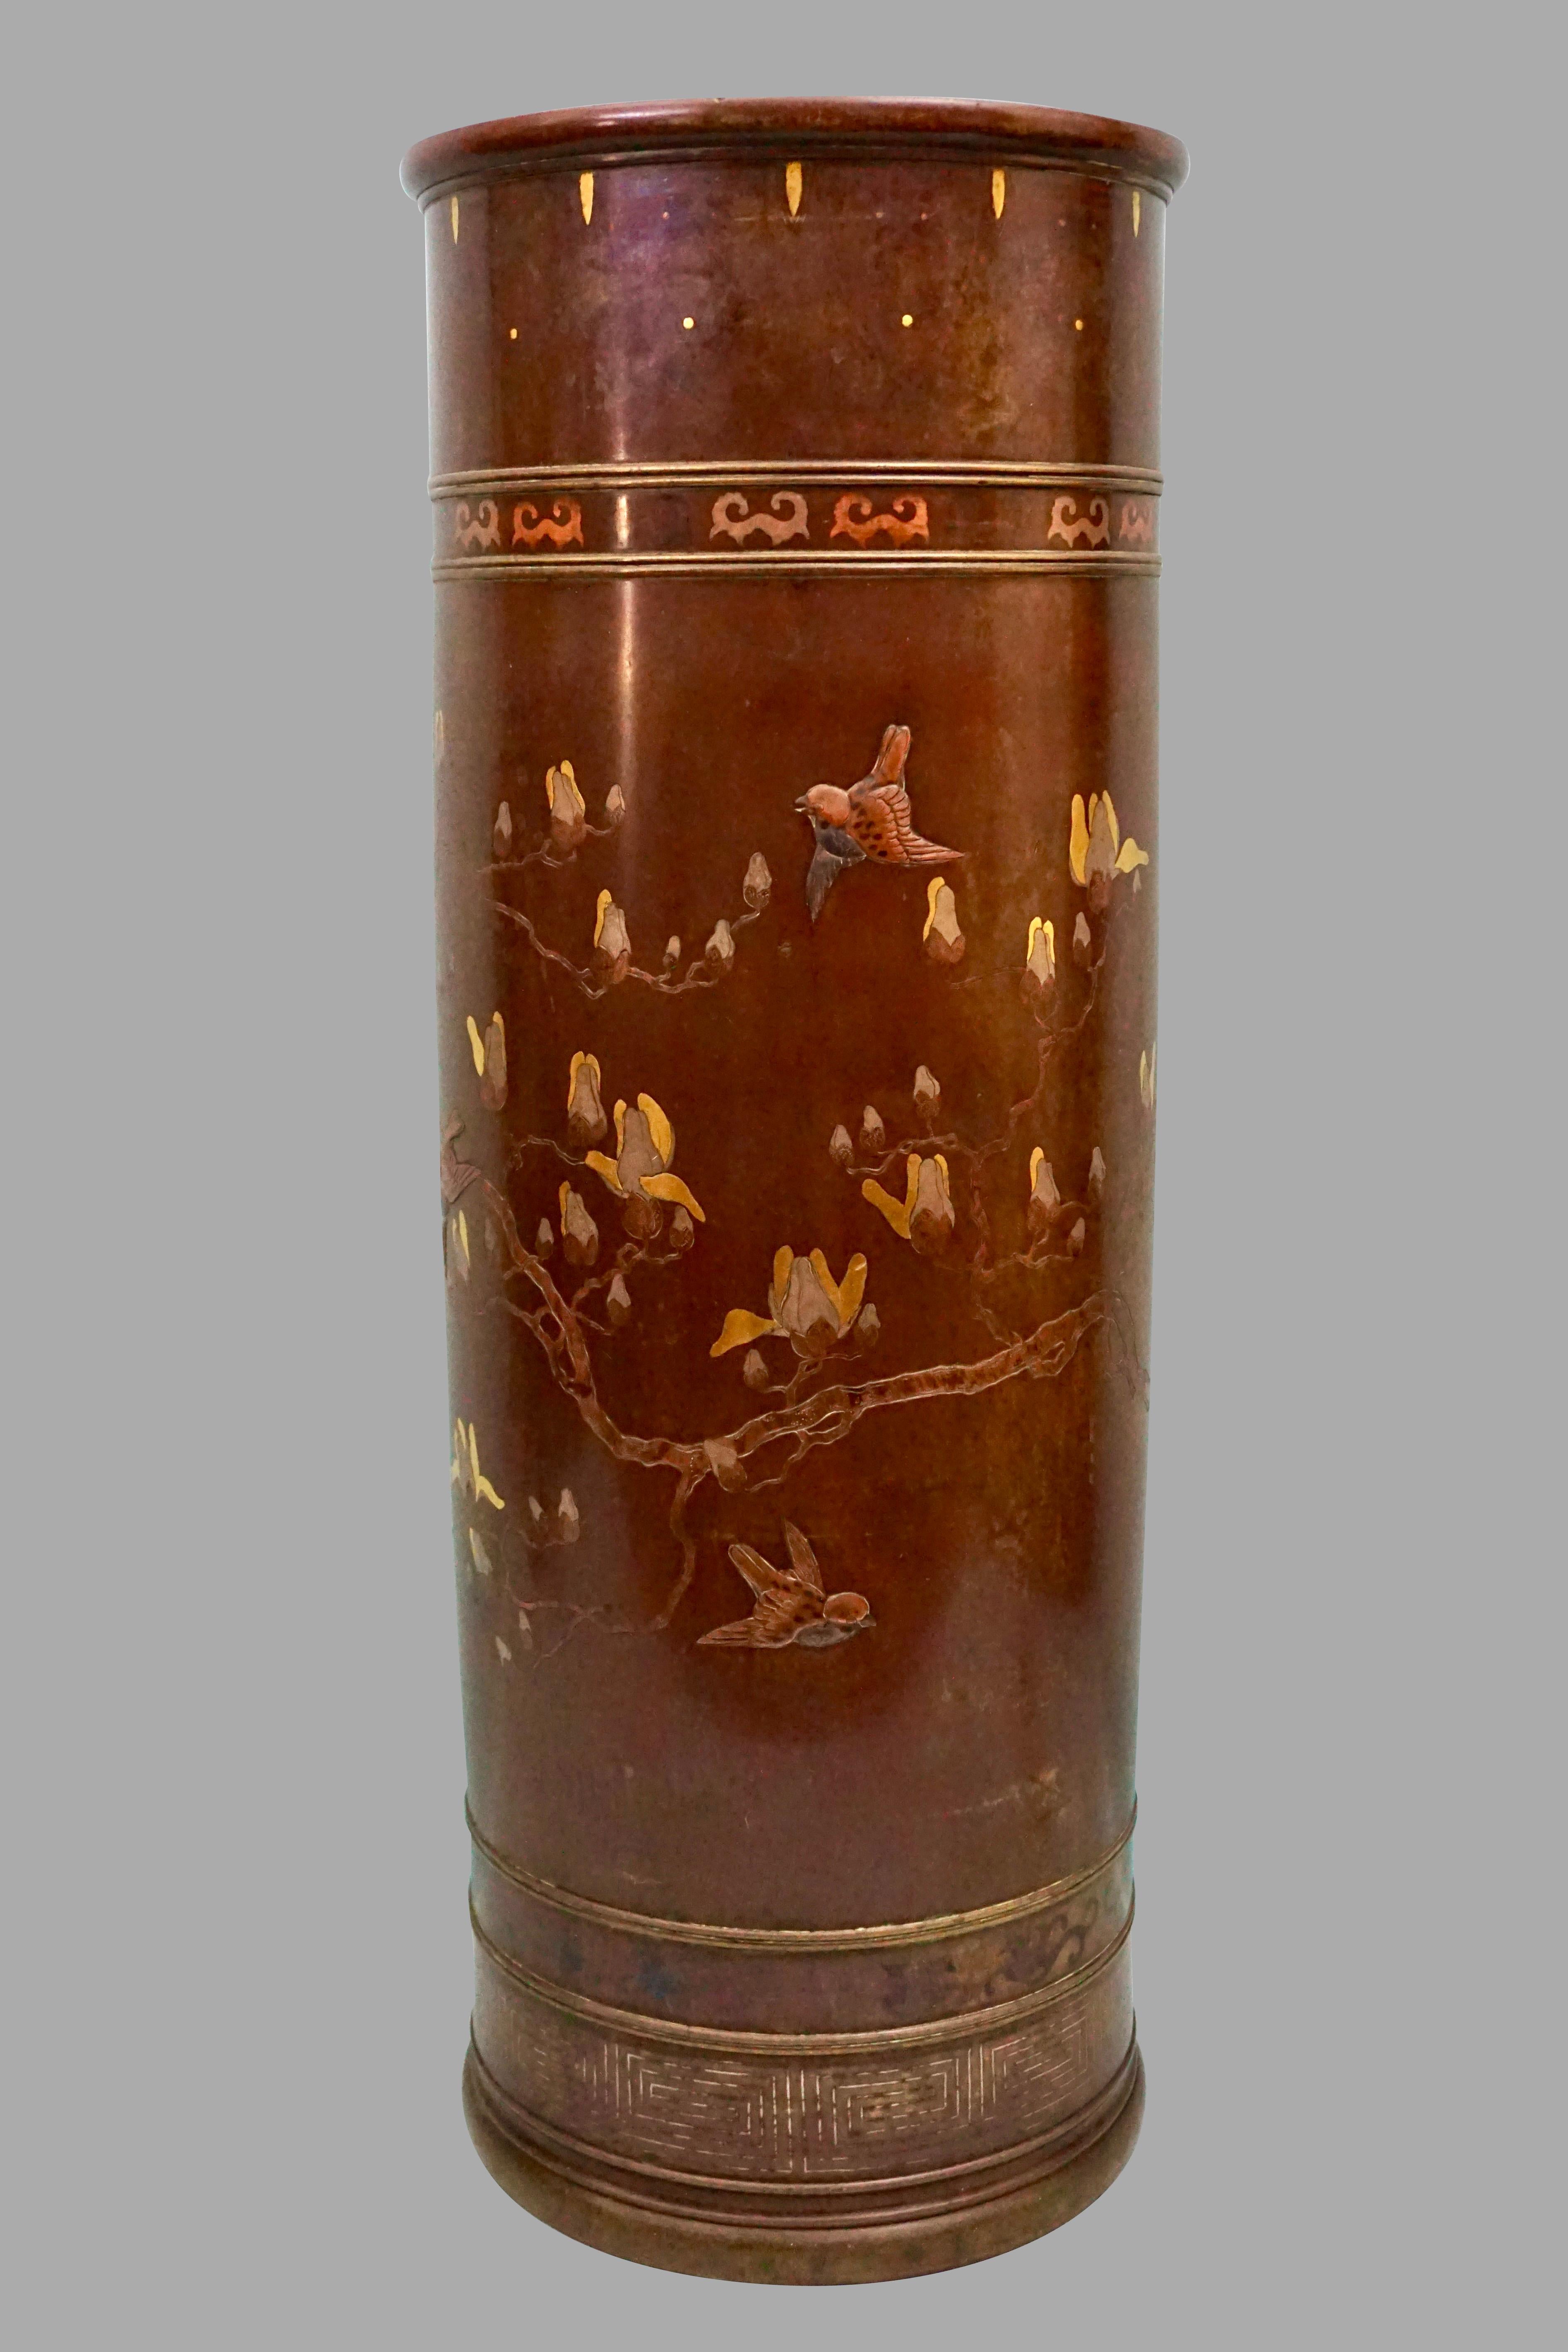 An elegant Japanese Meiji period bronze and yellow metal umbrella holder of cylindrical form, decorated overall with floral and and aviary designs in a garden setting. The small birds and chrysanthemums are executed in relief and form a lovely